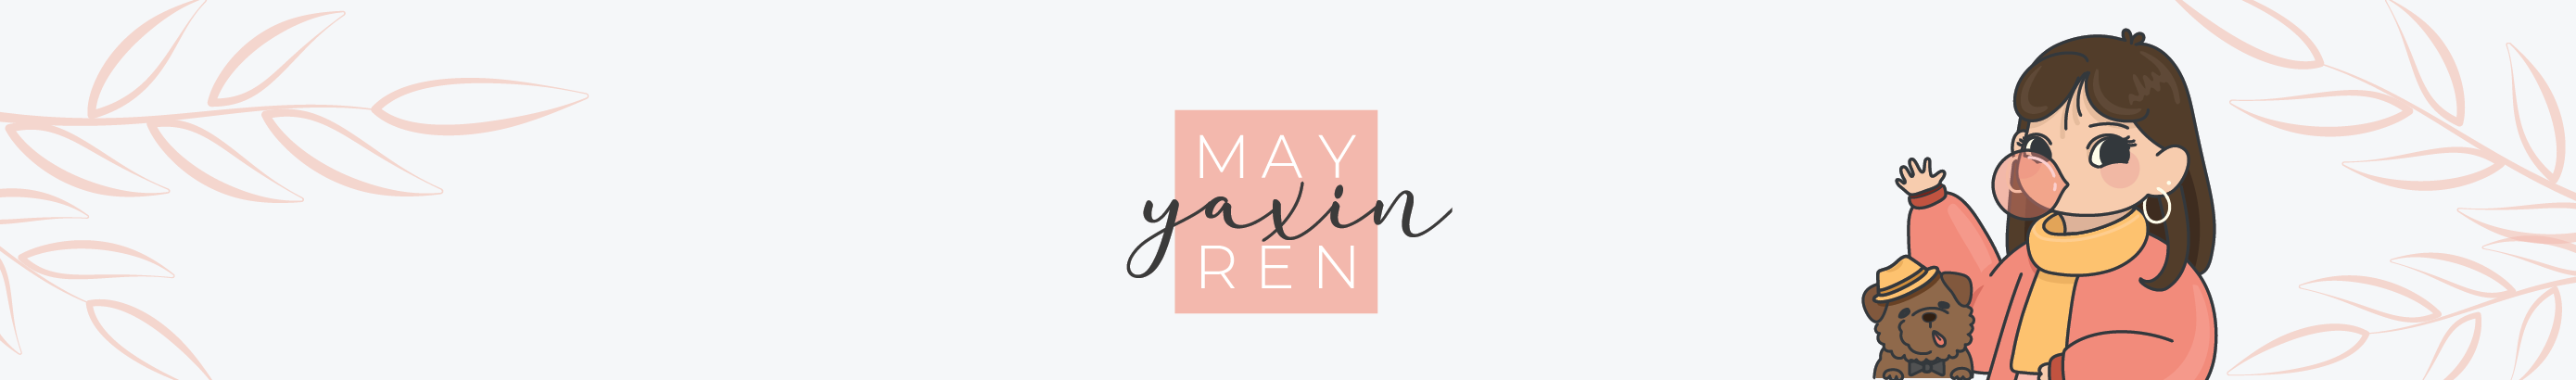 Yaxin (May) Ren's profile banner